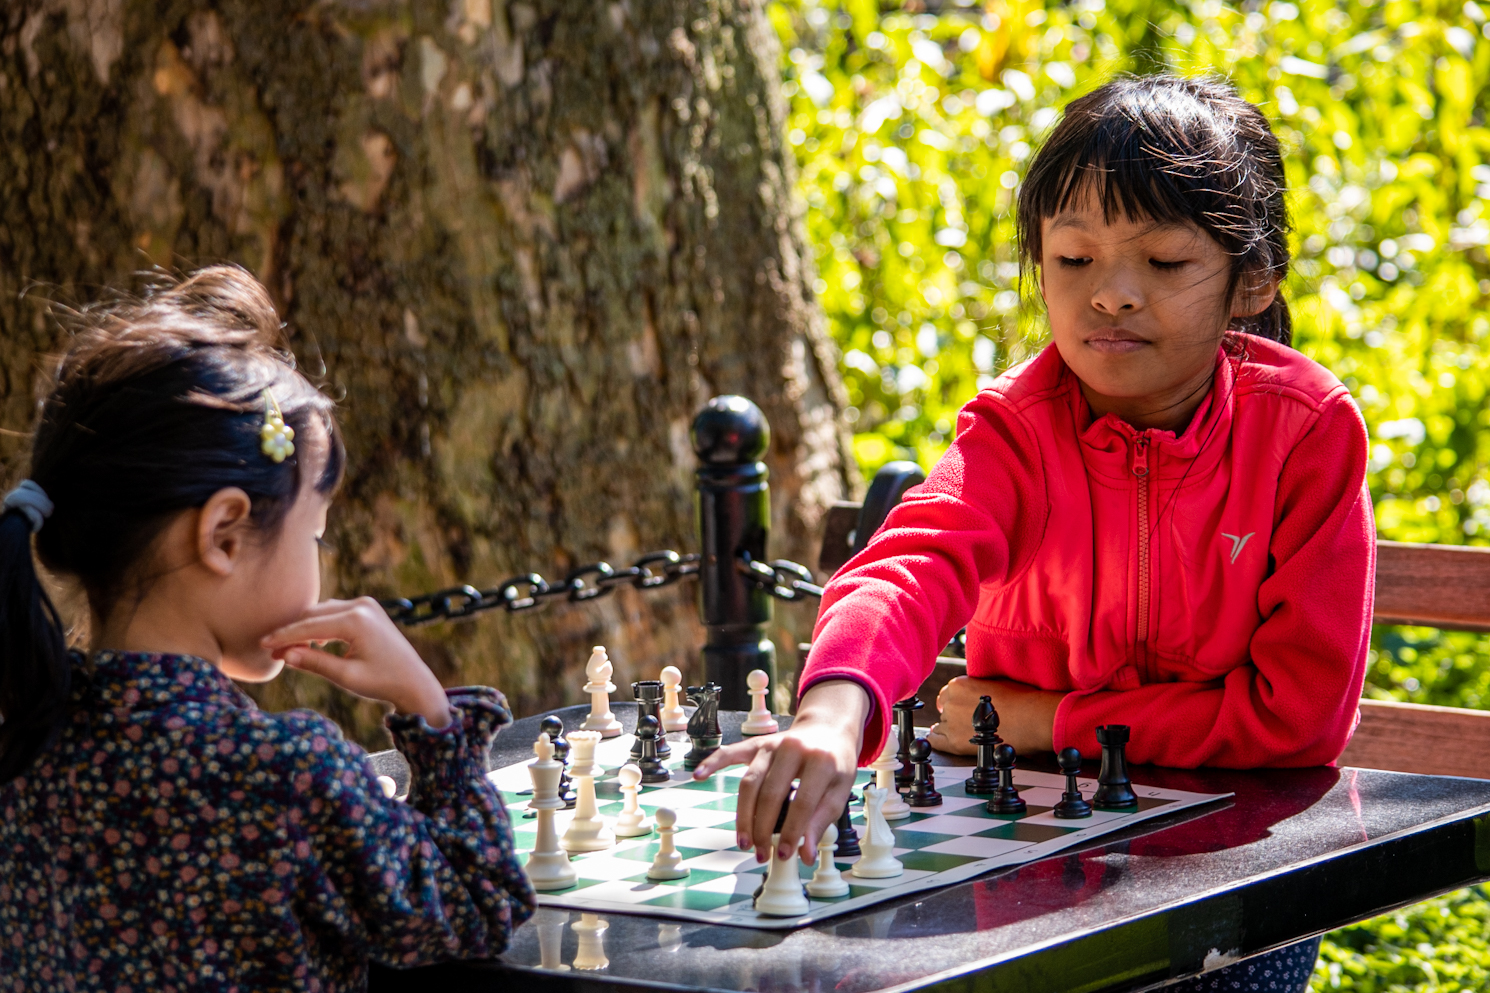 A young girl in a pink fleece holding a piece at a chess board, playing against another young girl.